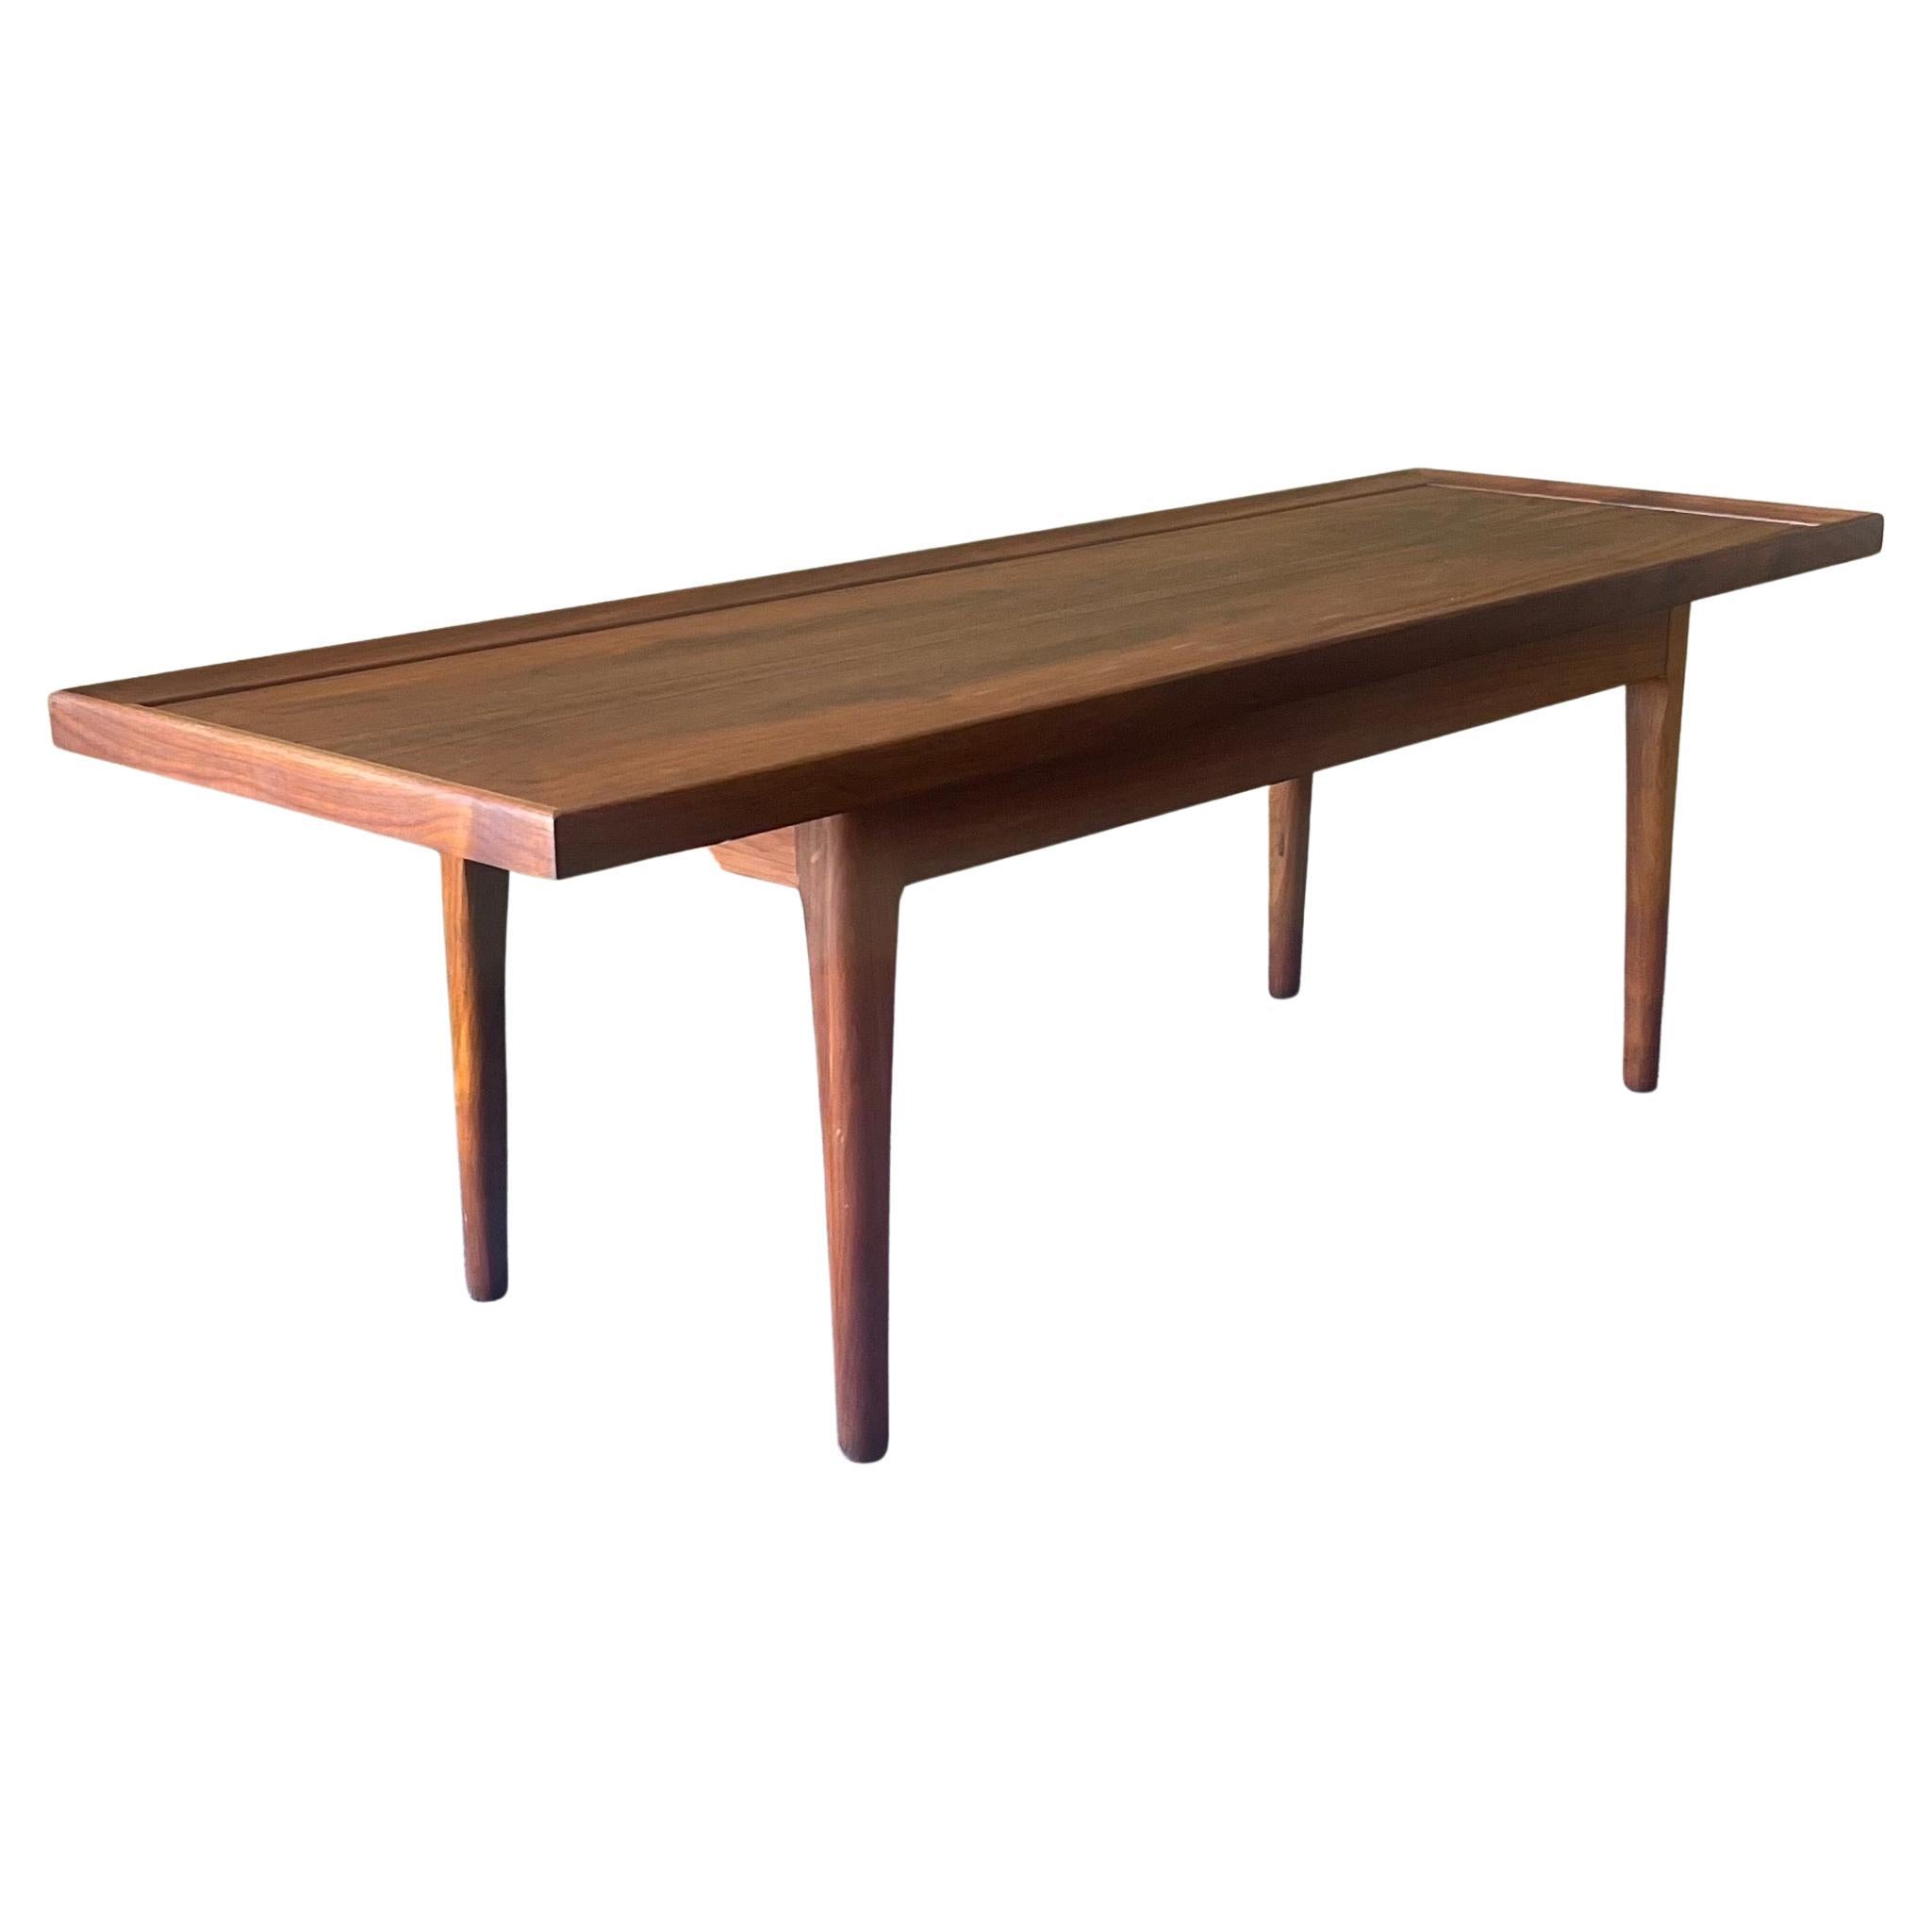 An exceptional minimalist low profile walnut coffee table by Kipp Stewart for Drexel - Declaration line, circa 1960s. The table has both a gorgeous tone and grain which is contrasted by an ebony inlay detail running along the tabletop near the